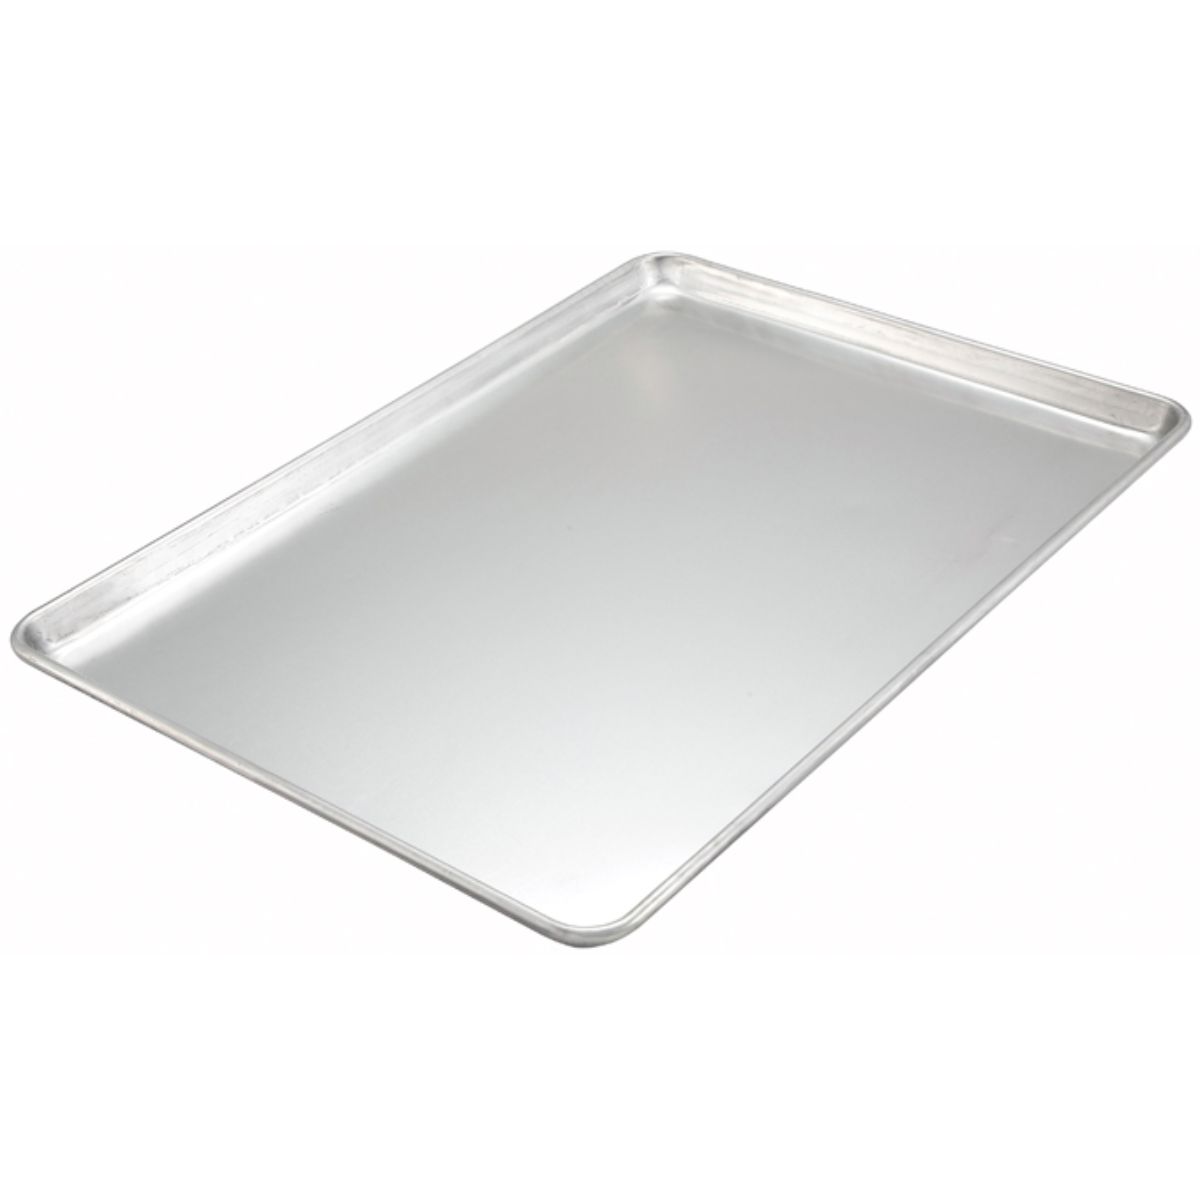 Winco SBS-21 Square Baking Mat, 15 3/8 x 21 1/2 in, Fits 2/3 Size